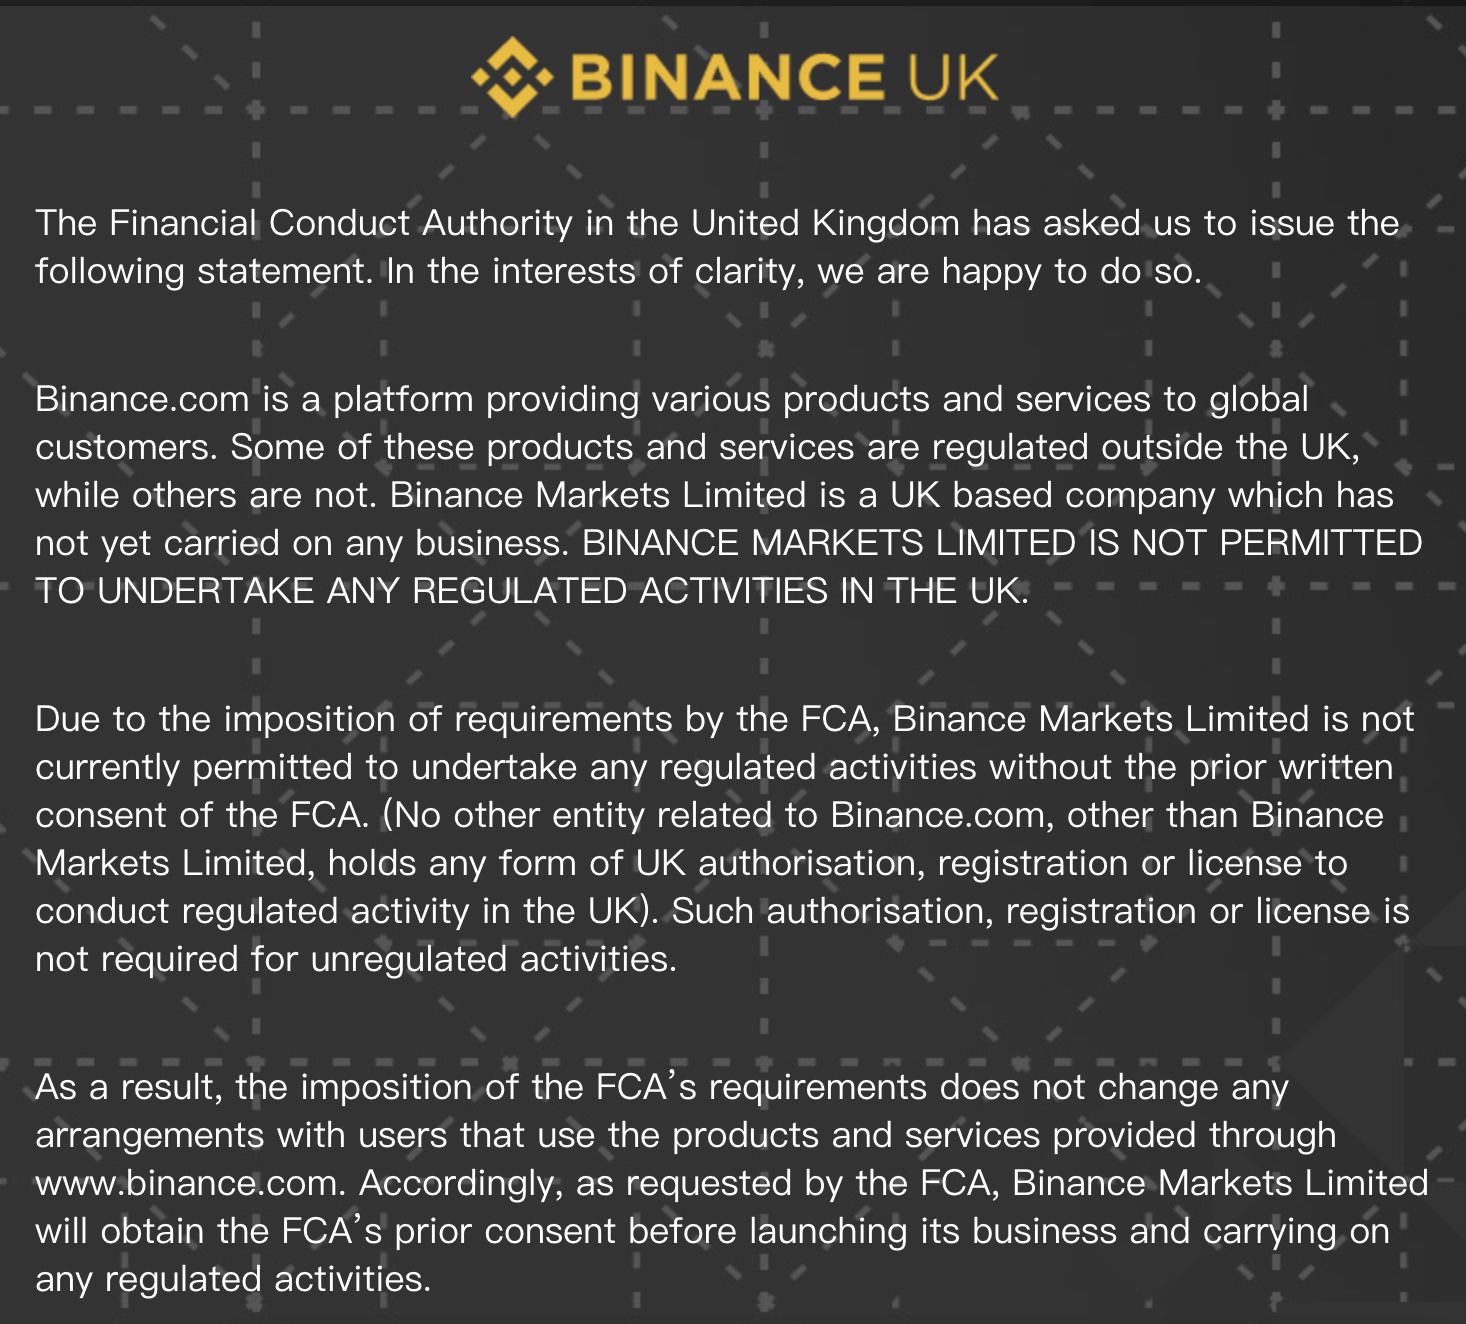 Binance's compliance with Financial Conduct Authority's request. Source: bianace.co.uk